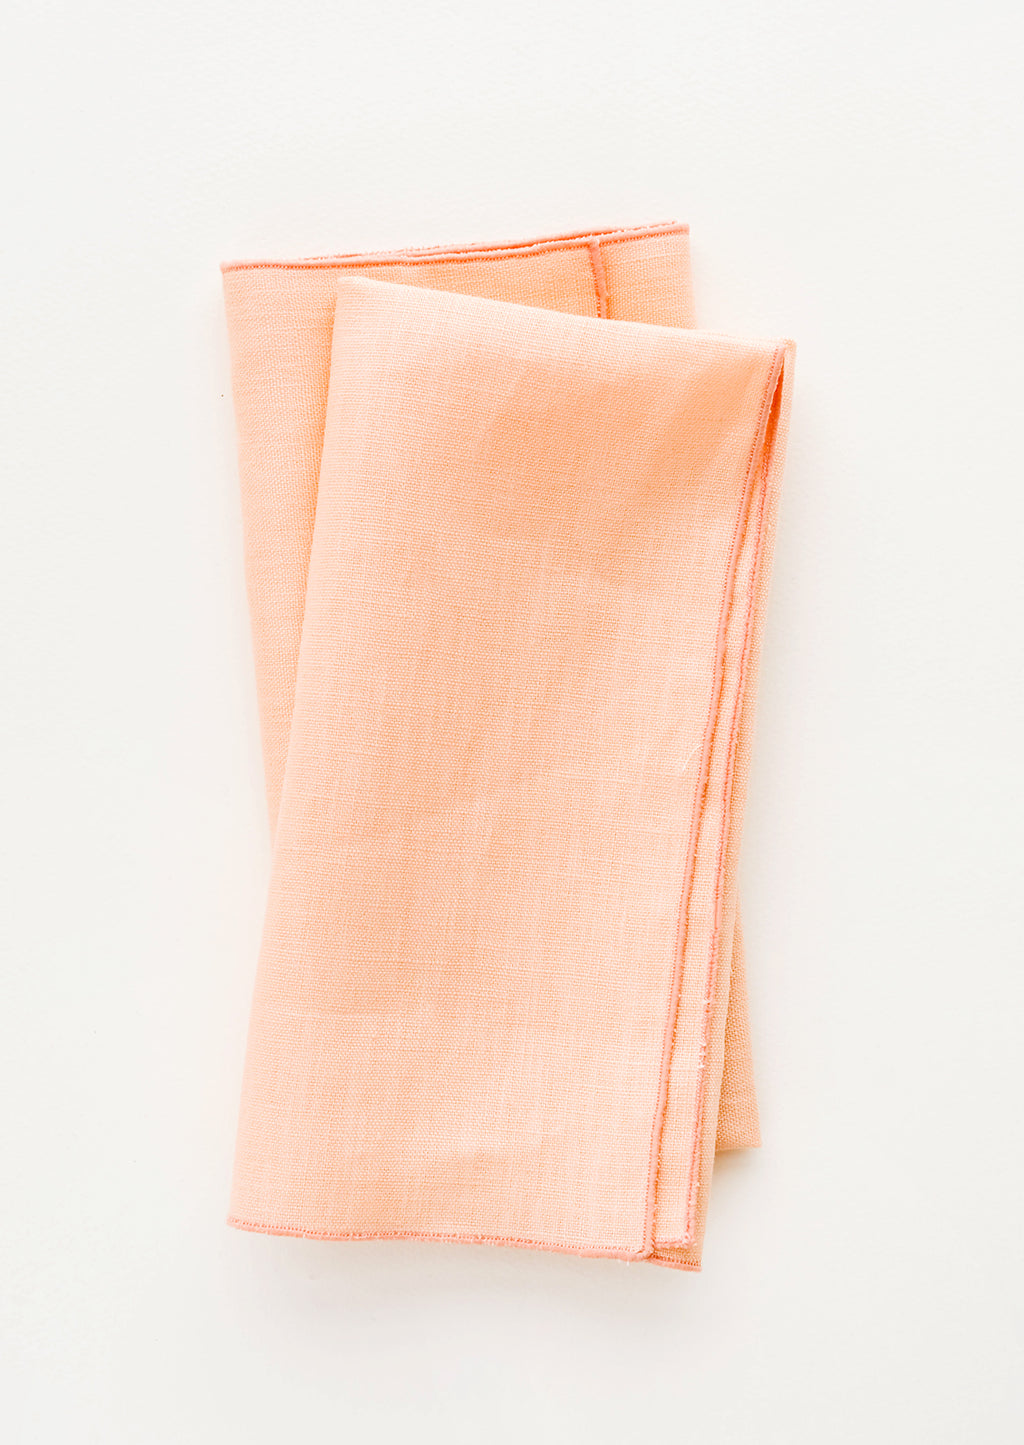 Peach: Pair of folded linen napkins in peach with tonal trim